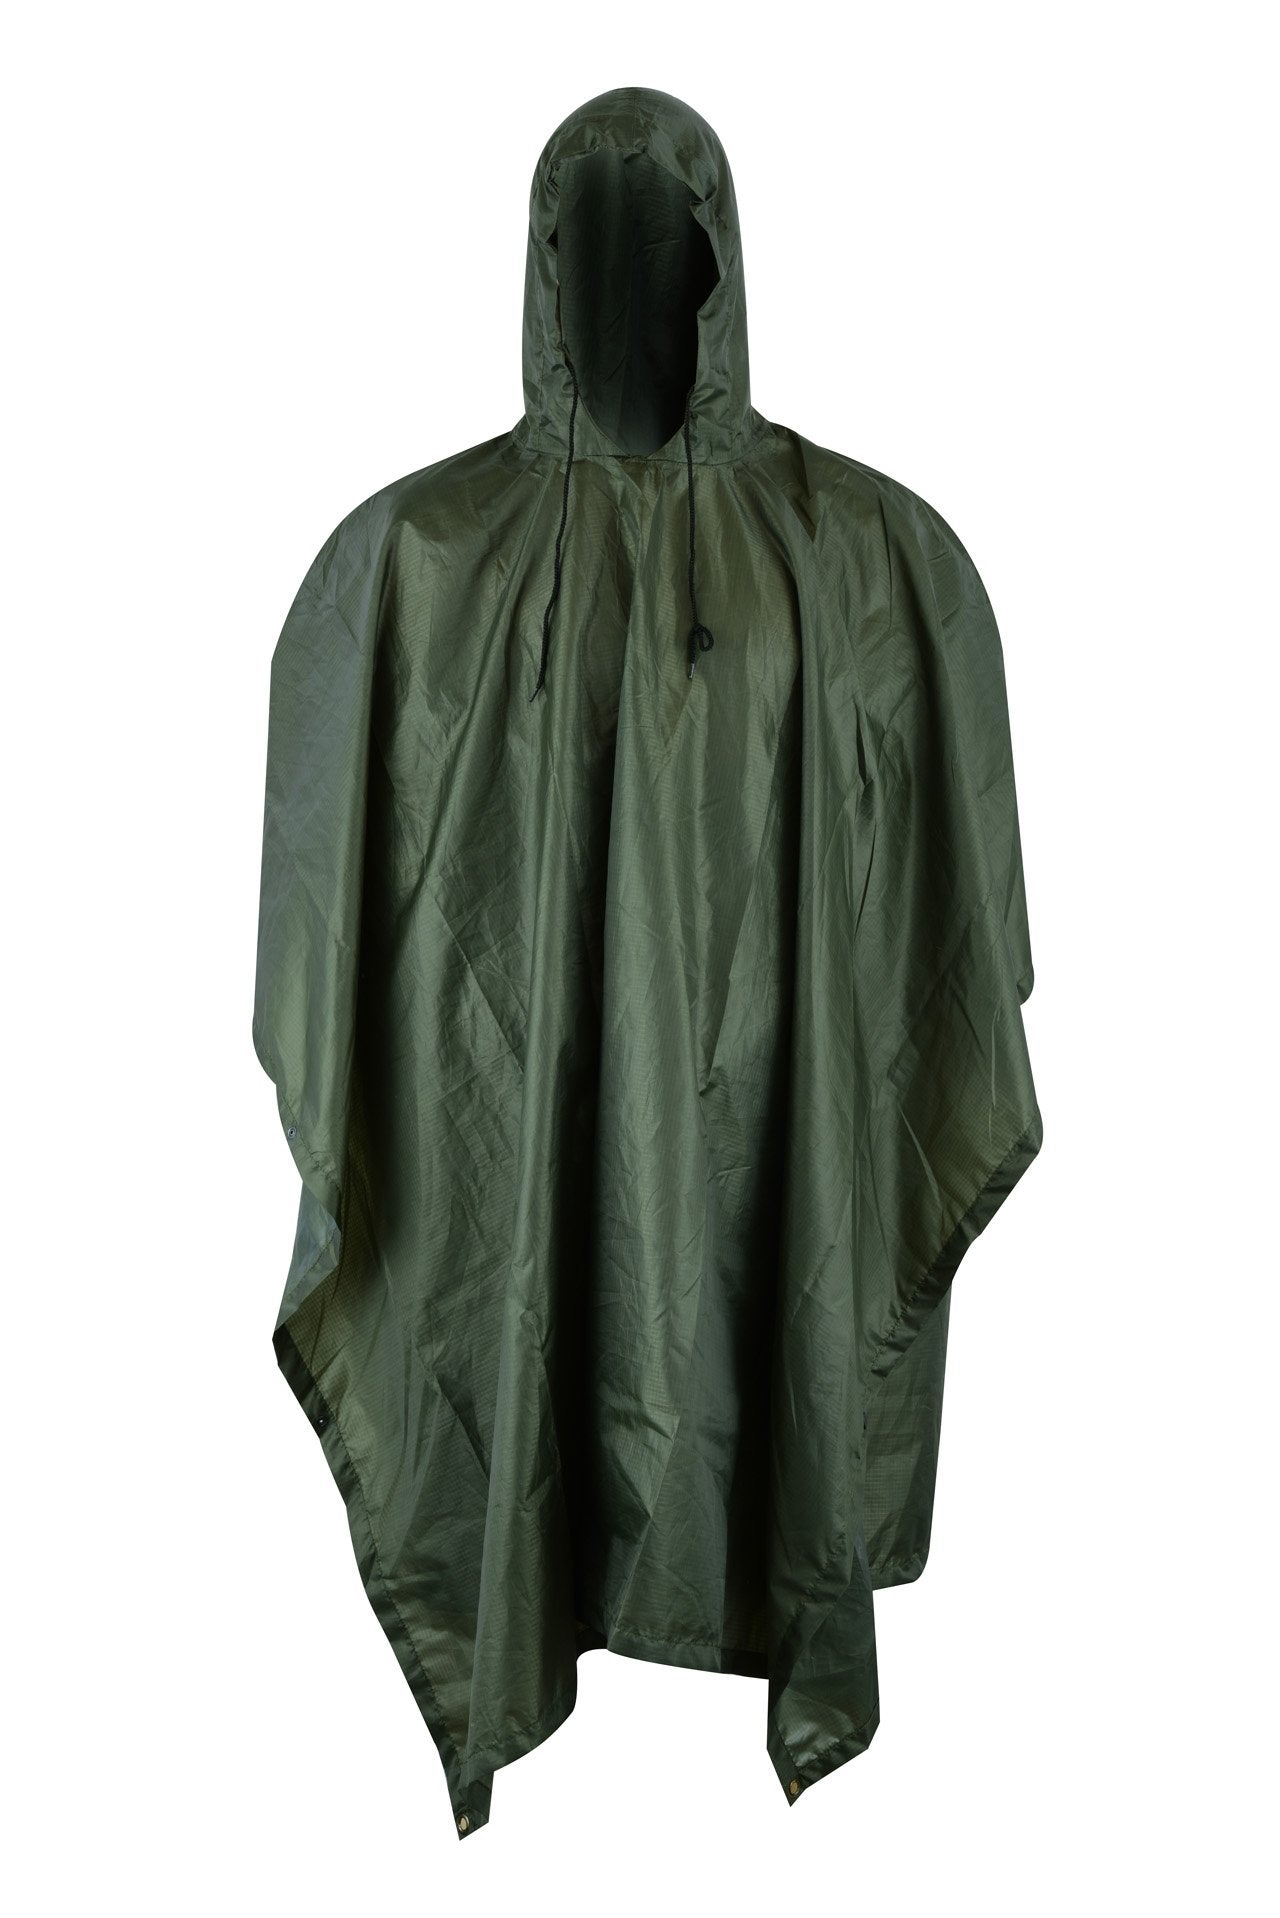 "Versatile Outdoor Poncho - Ideal for Rain Gear, Tarpaulin, Shelter, or Tent"